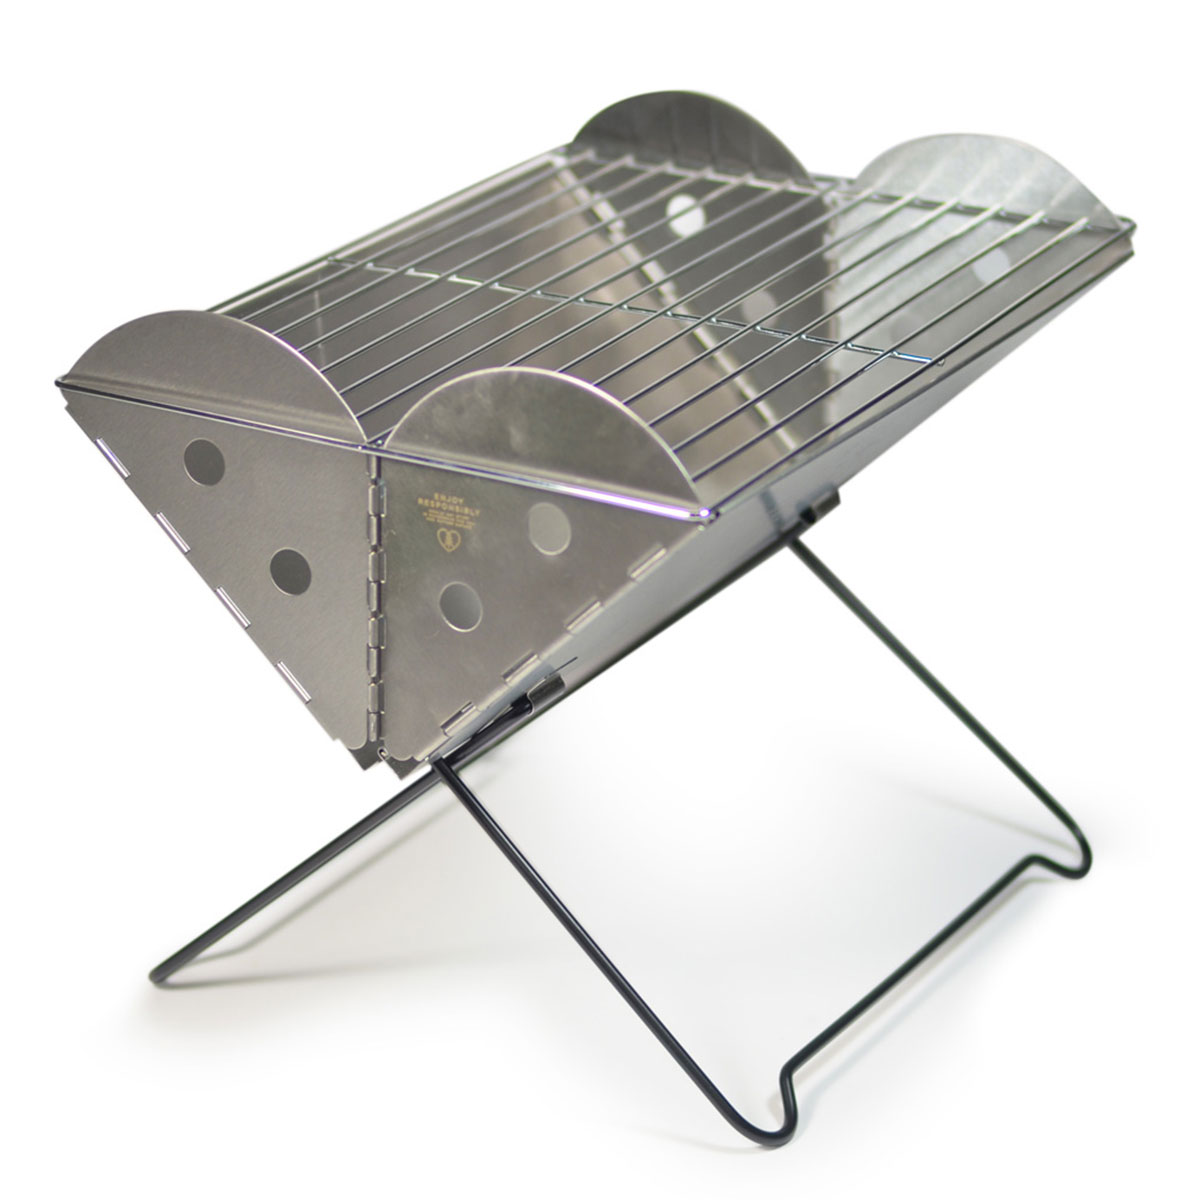 UCO Portable Flatpack grill